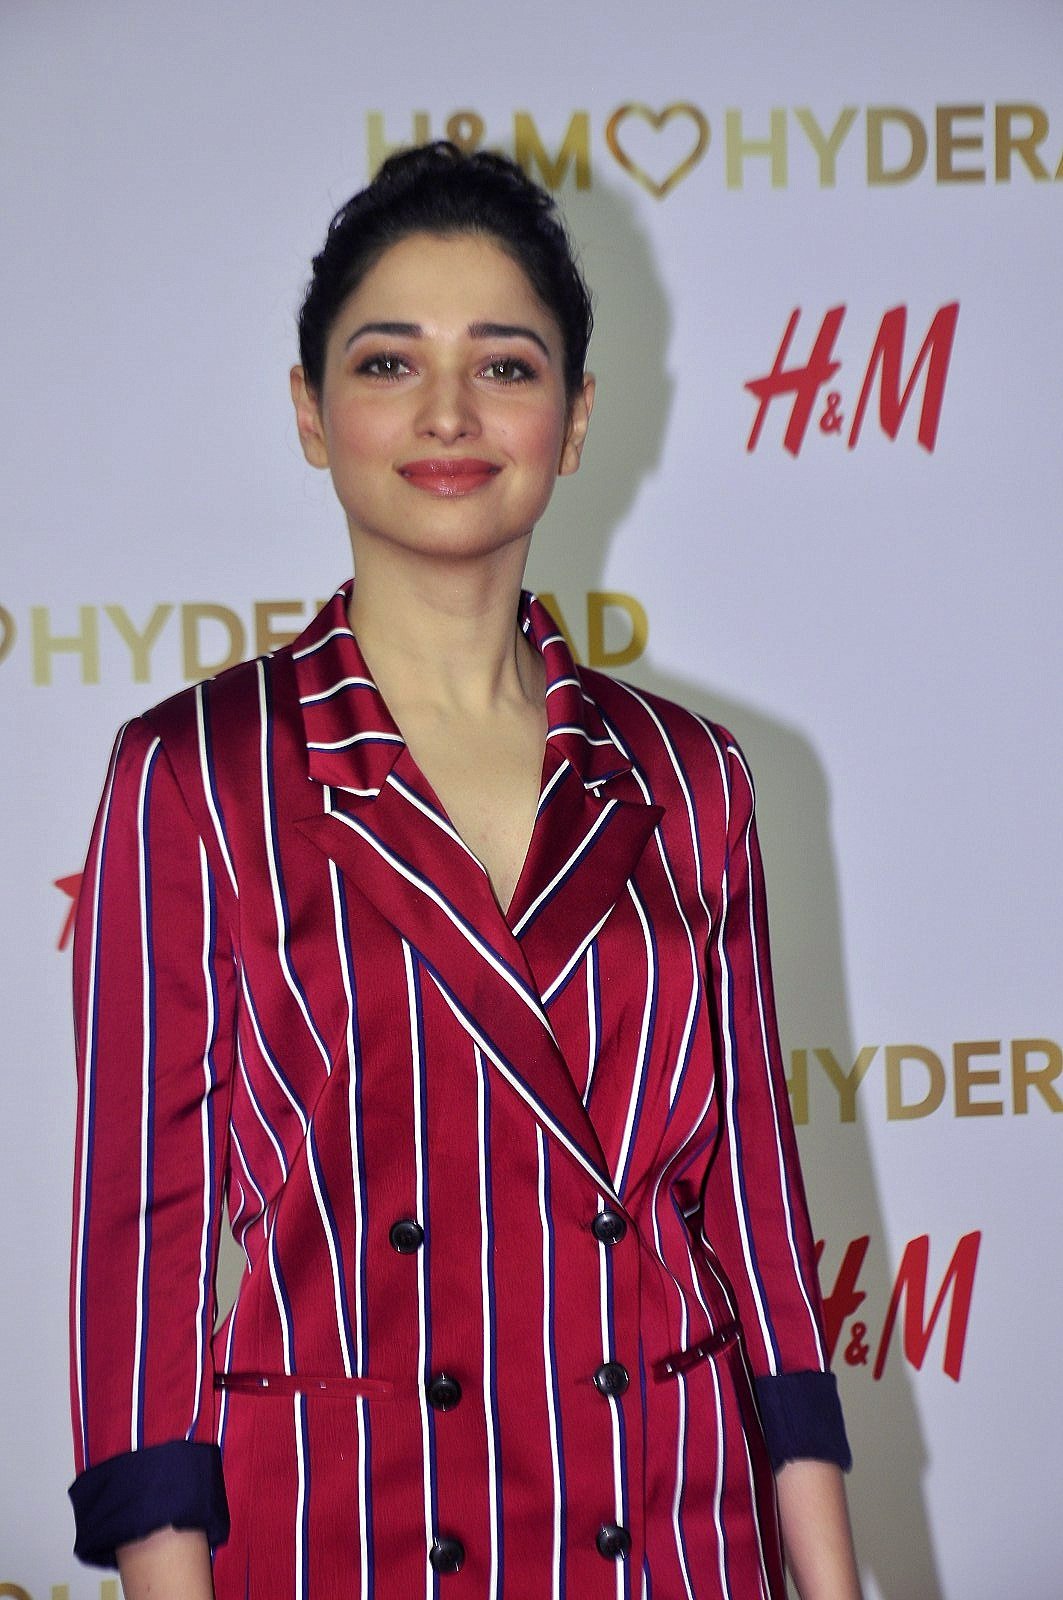 Tamannaah Bhatia Sexiest Legs Show At H&M VIP Party At Inorbit Mall in Hyderabad